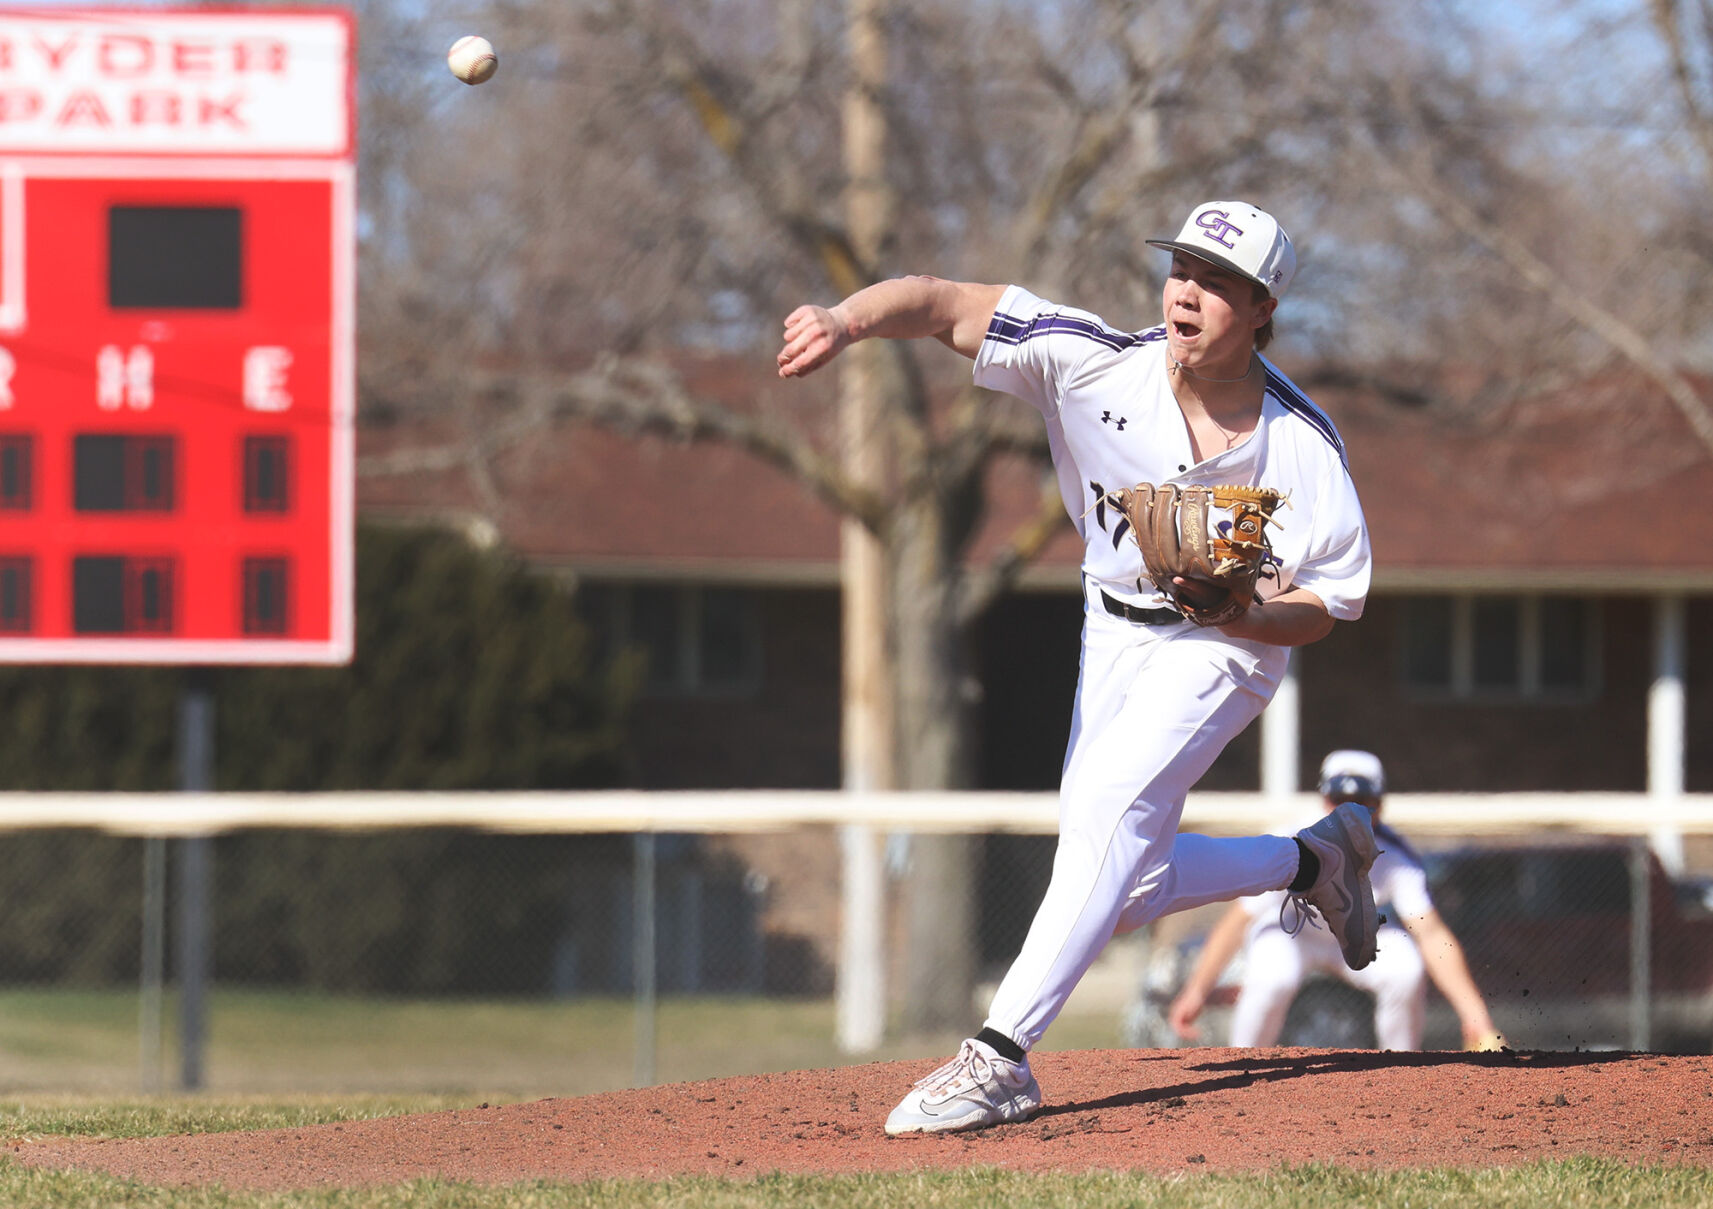 Grand Island Senior High Dominates Hastings in 11-1 Victory, Advances to 3-1 Record